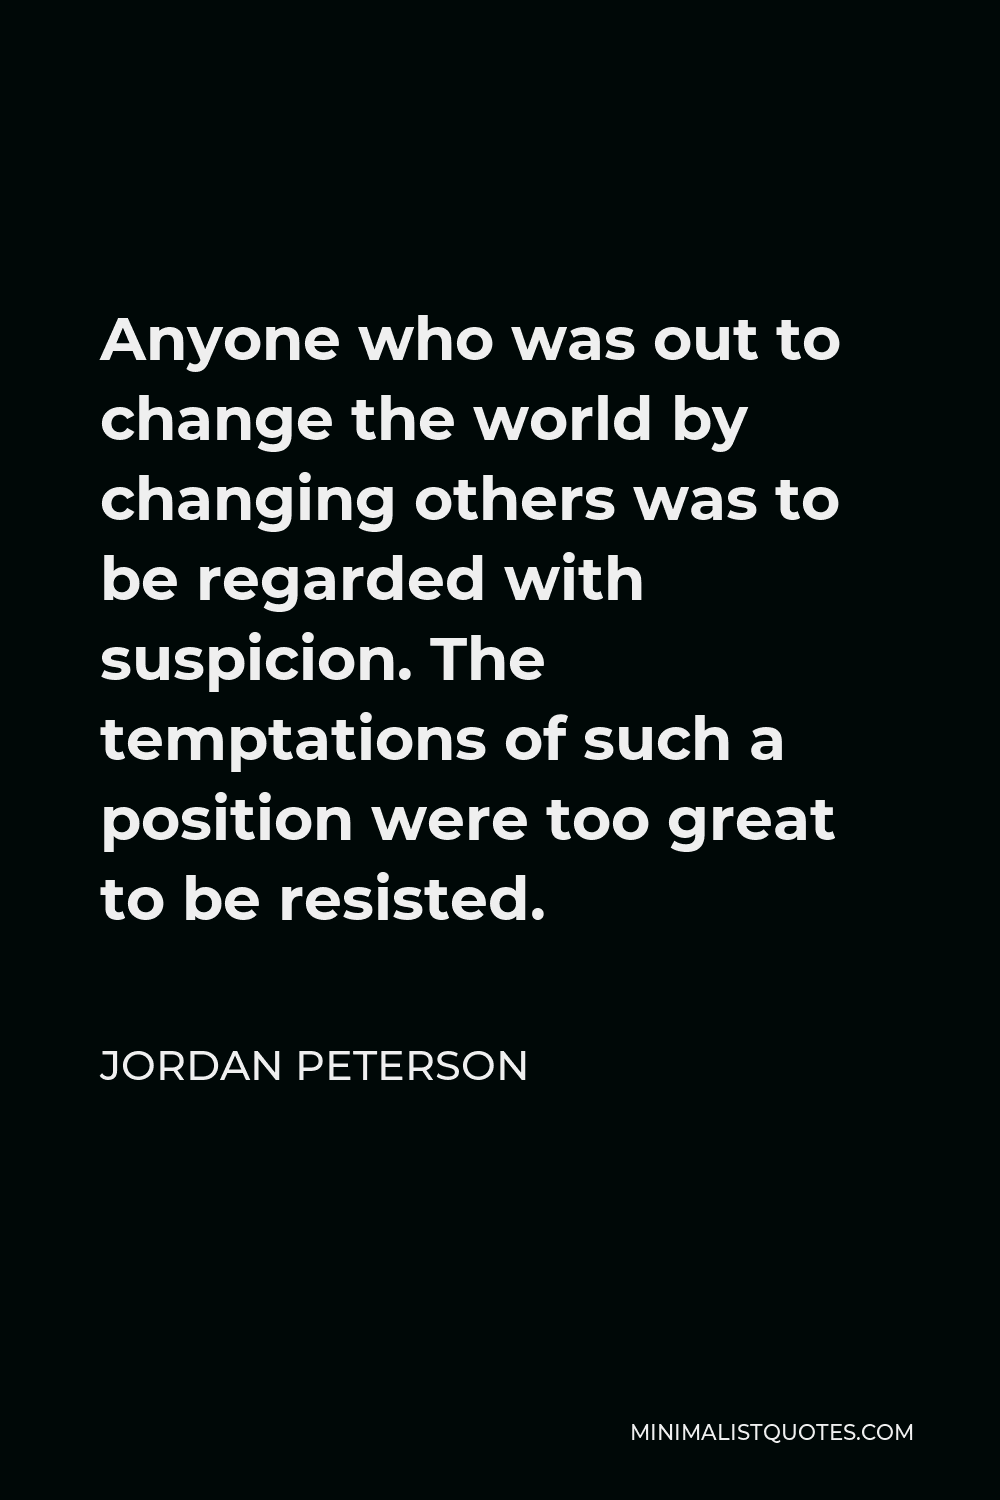 Peterson Quote: Anyone who was out to change the world by changing others was to regarded with suspicion. The temptations of such a position too great to be resisted.